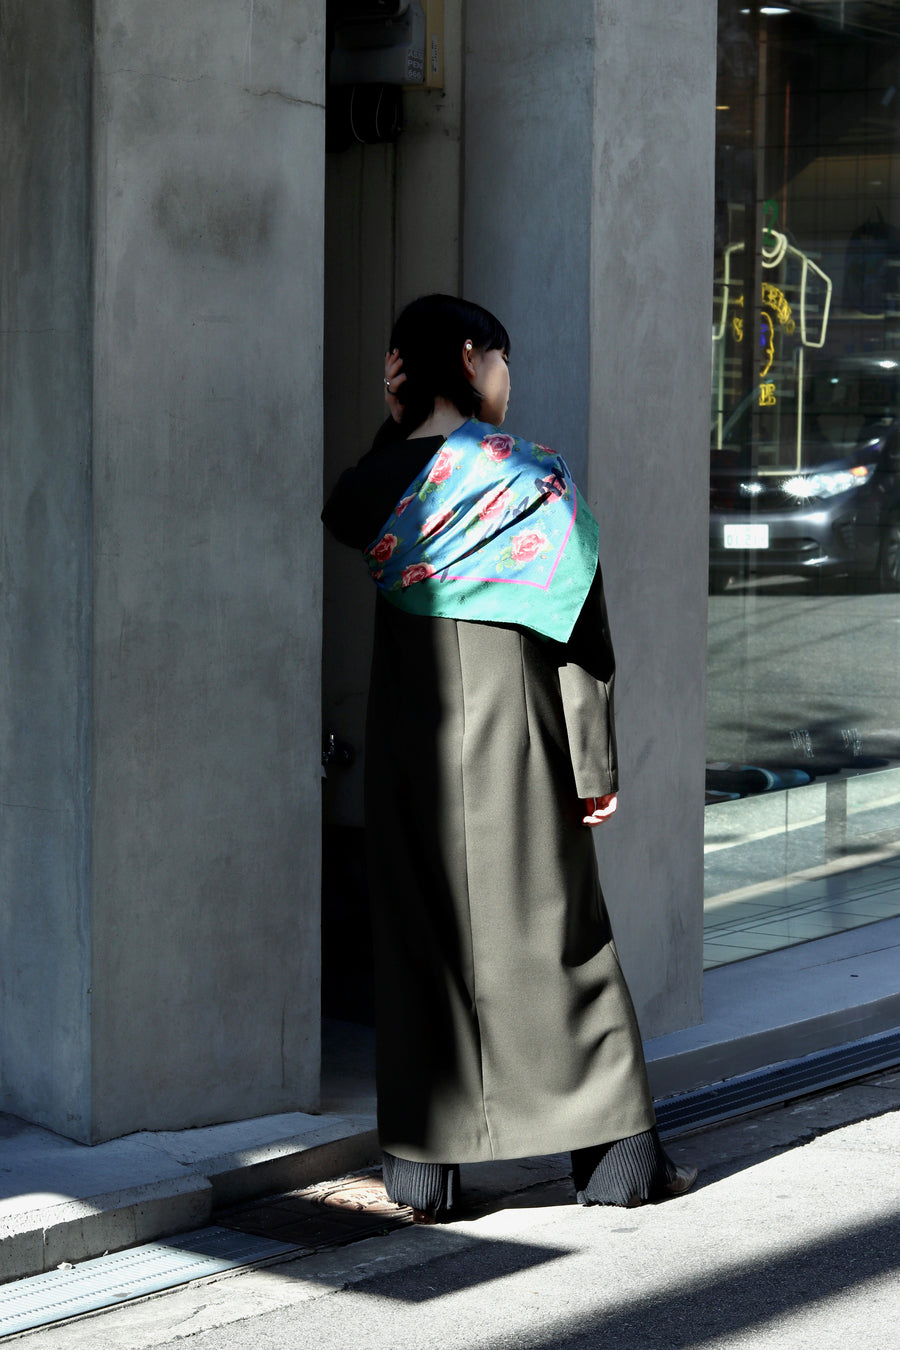 LASTFRAME  ROSE SCARF（GREEN x BLUE）